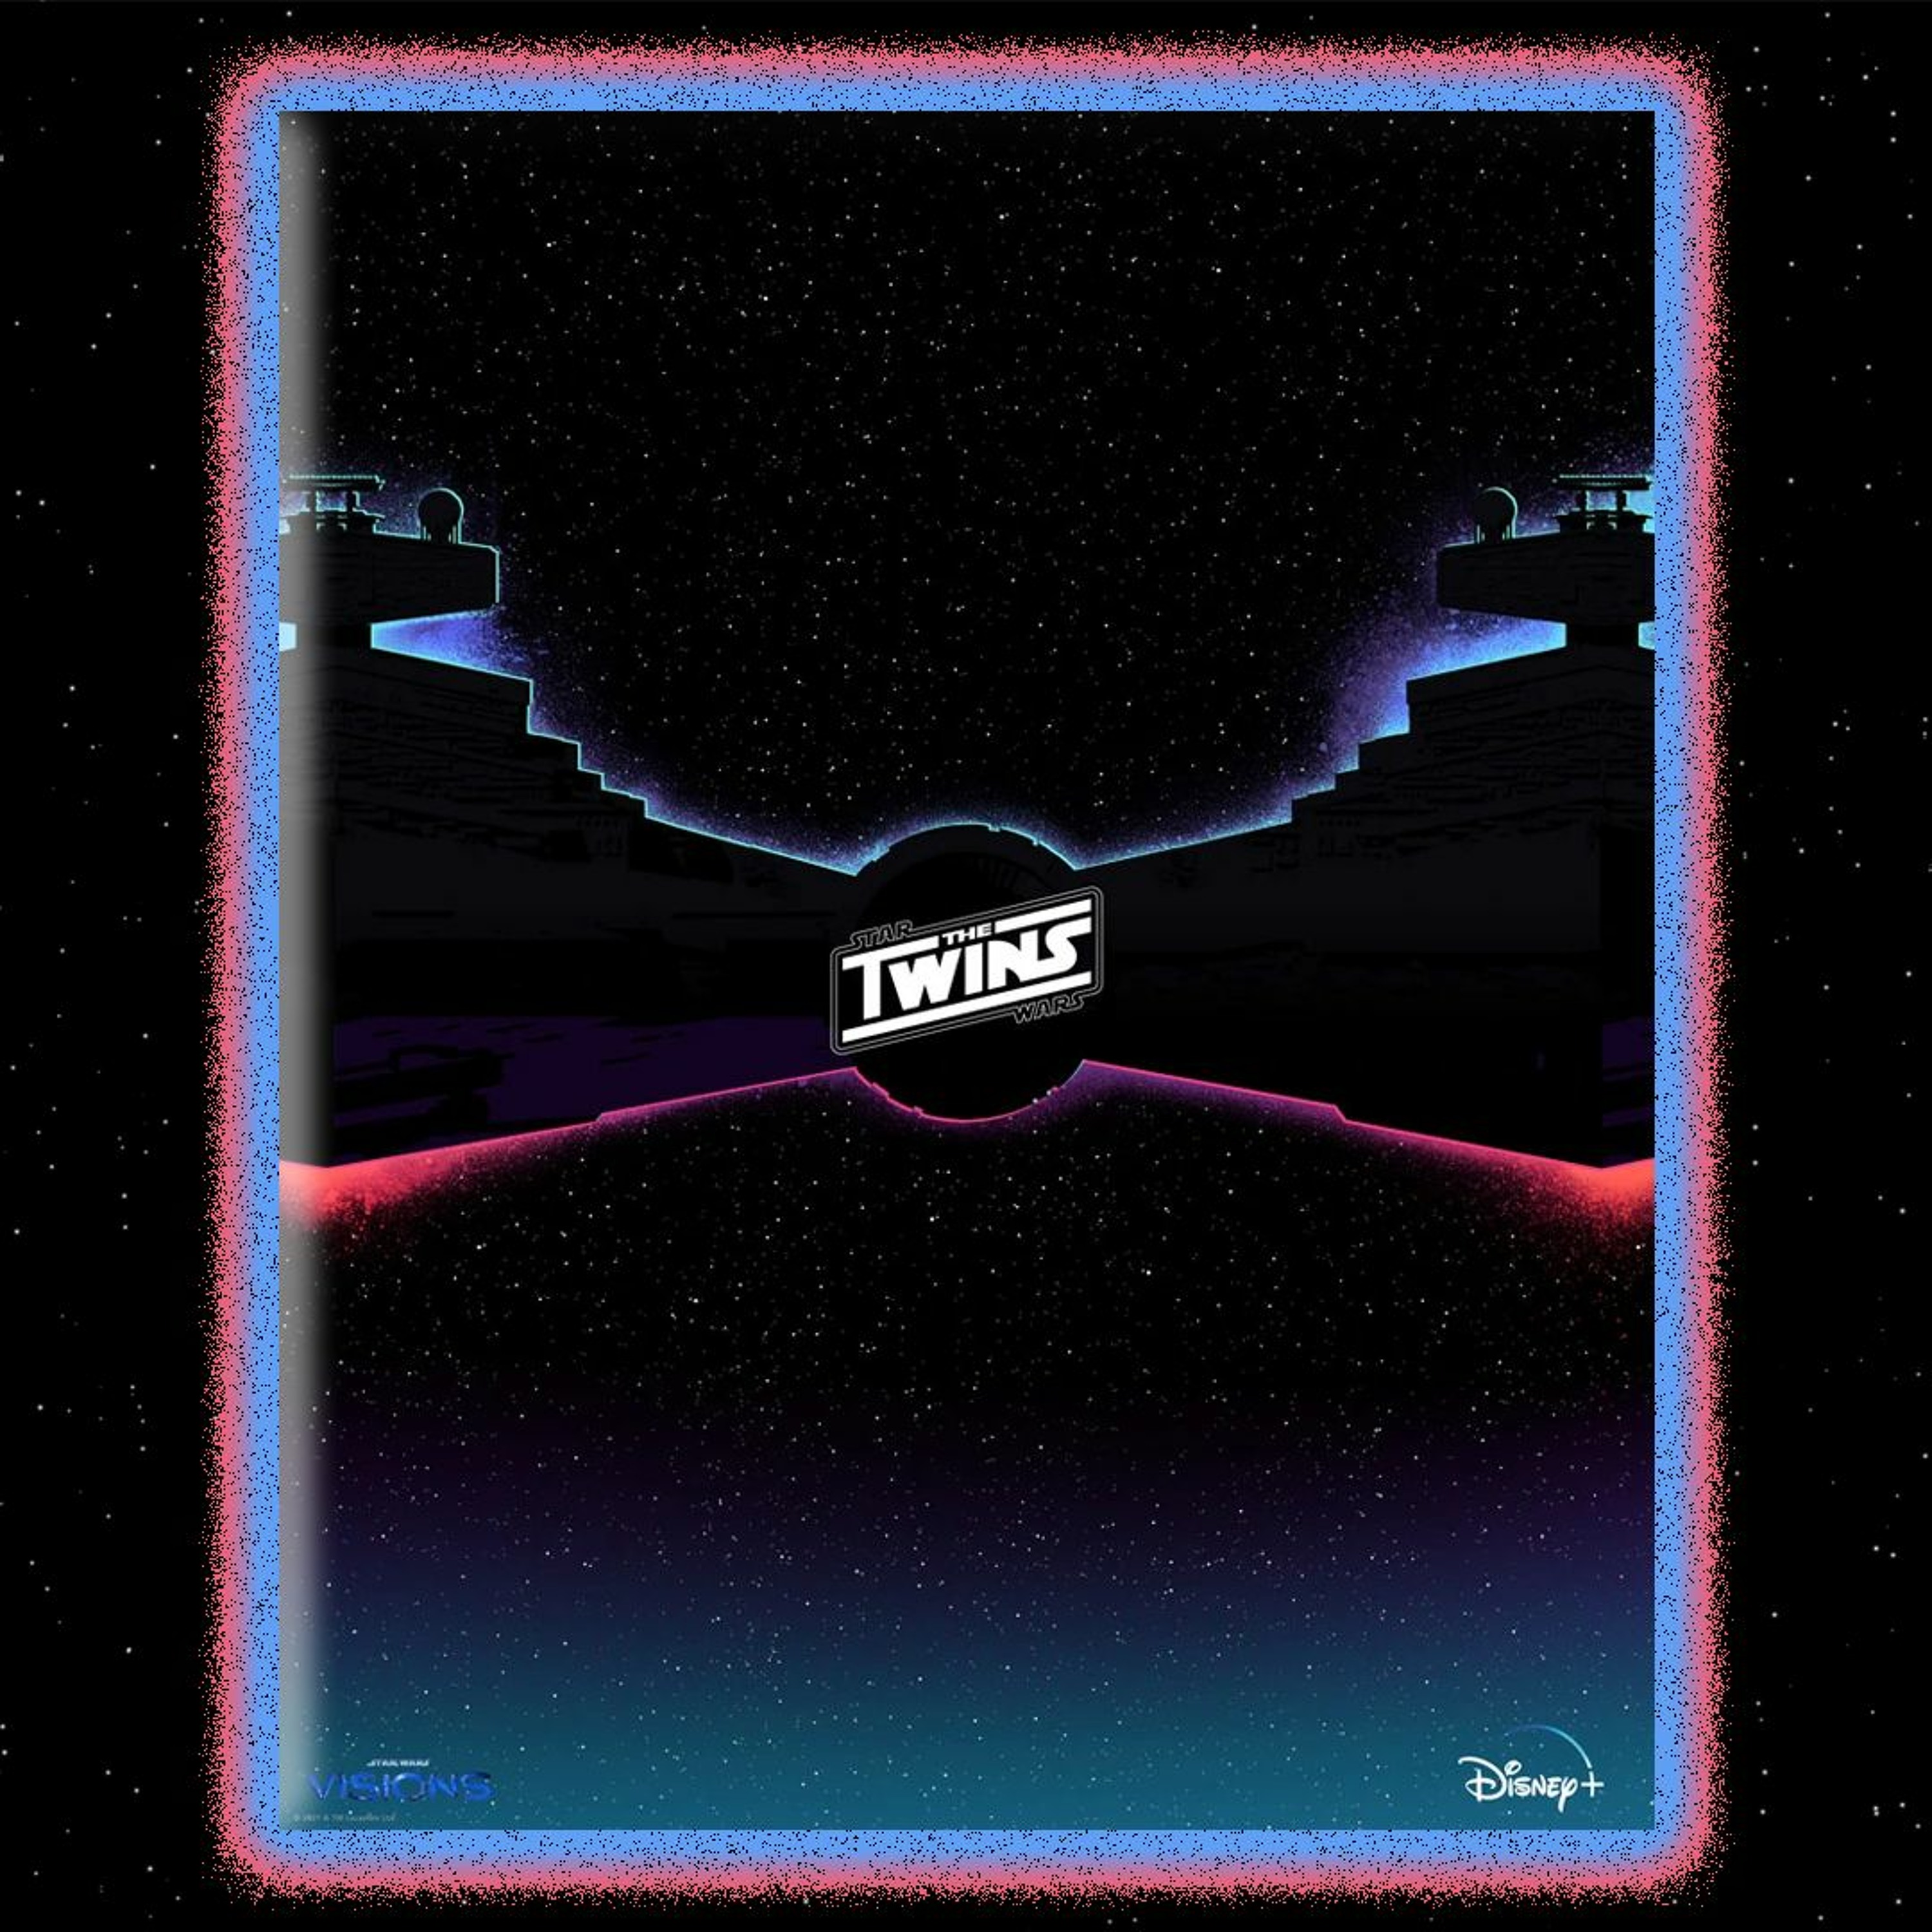 Star Wars Visions E3 - The Twins by Trigger Inc.